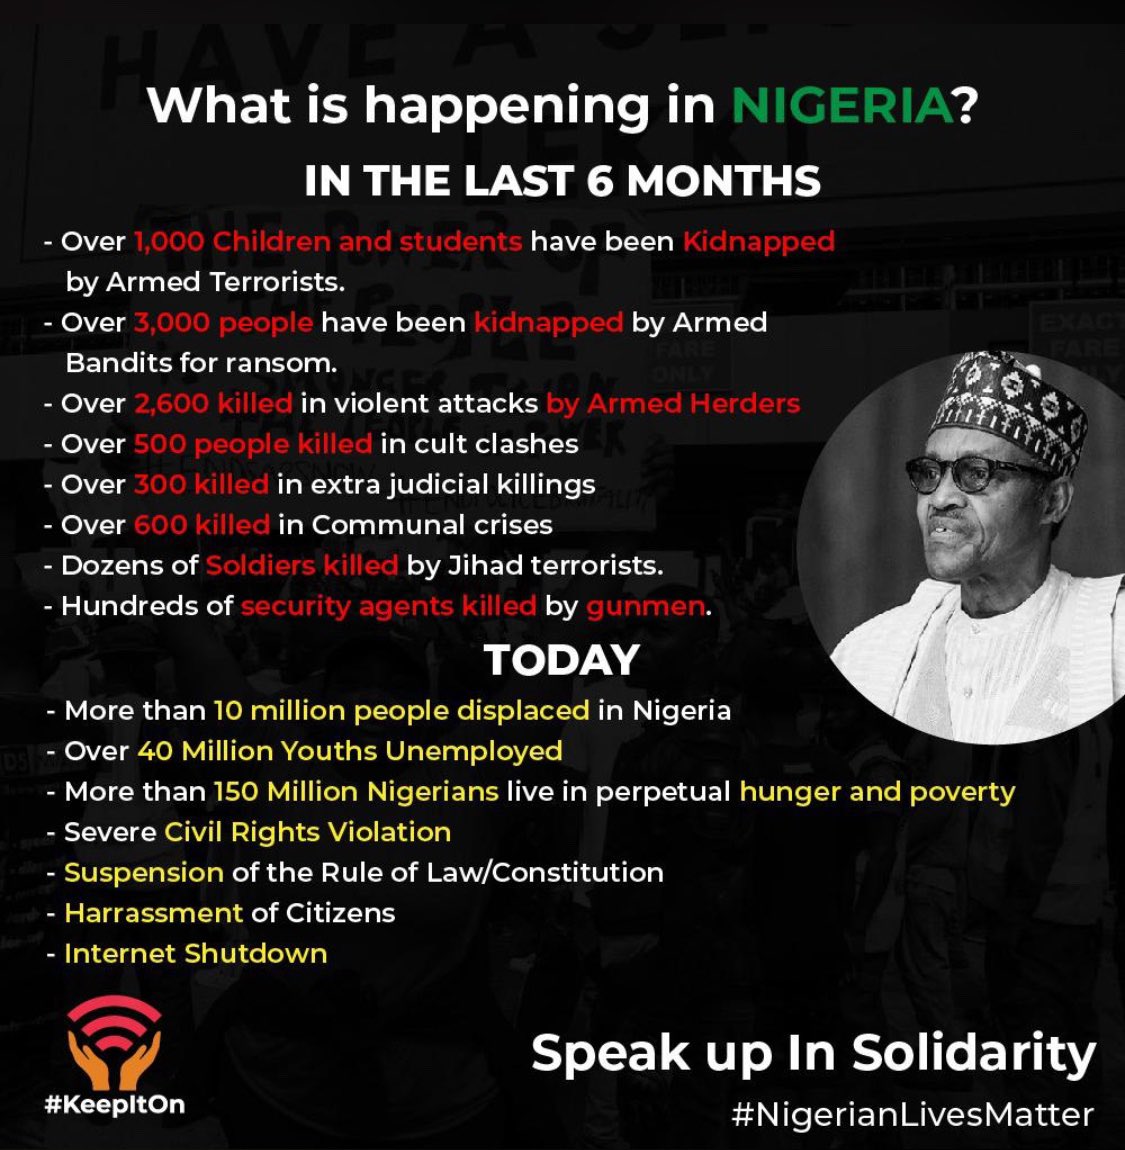 This is why Nigerians are protesting.
#June12thProtest #KeepitOn #EnoughIsEnough #NigerianLivesMatter #EndBadGovernment